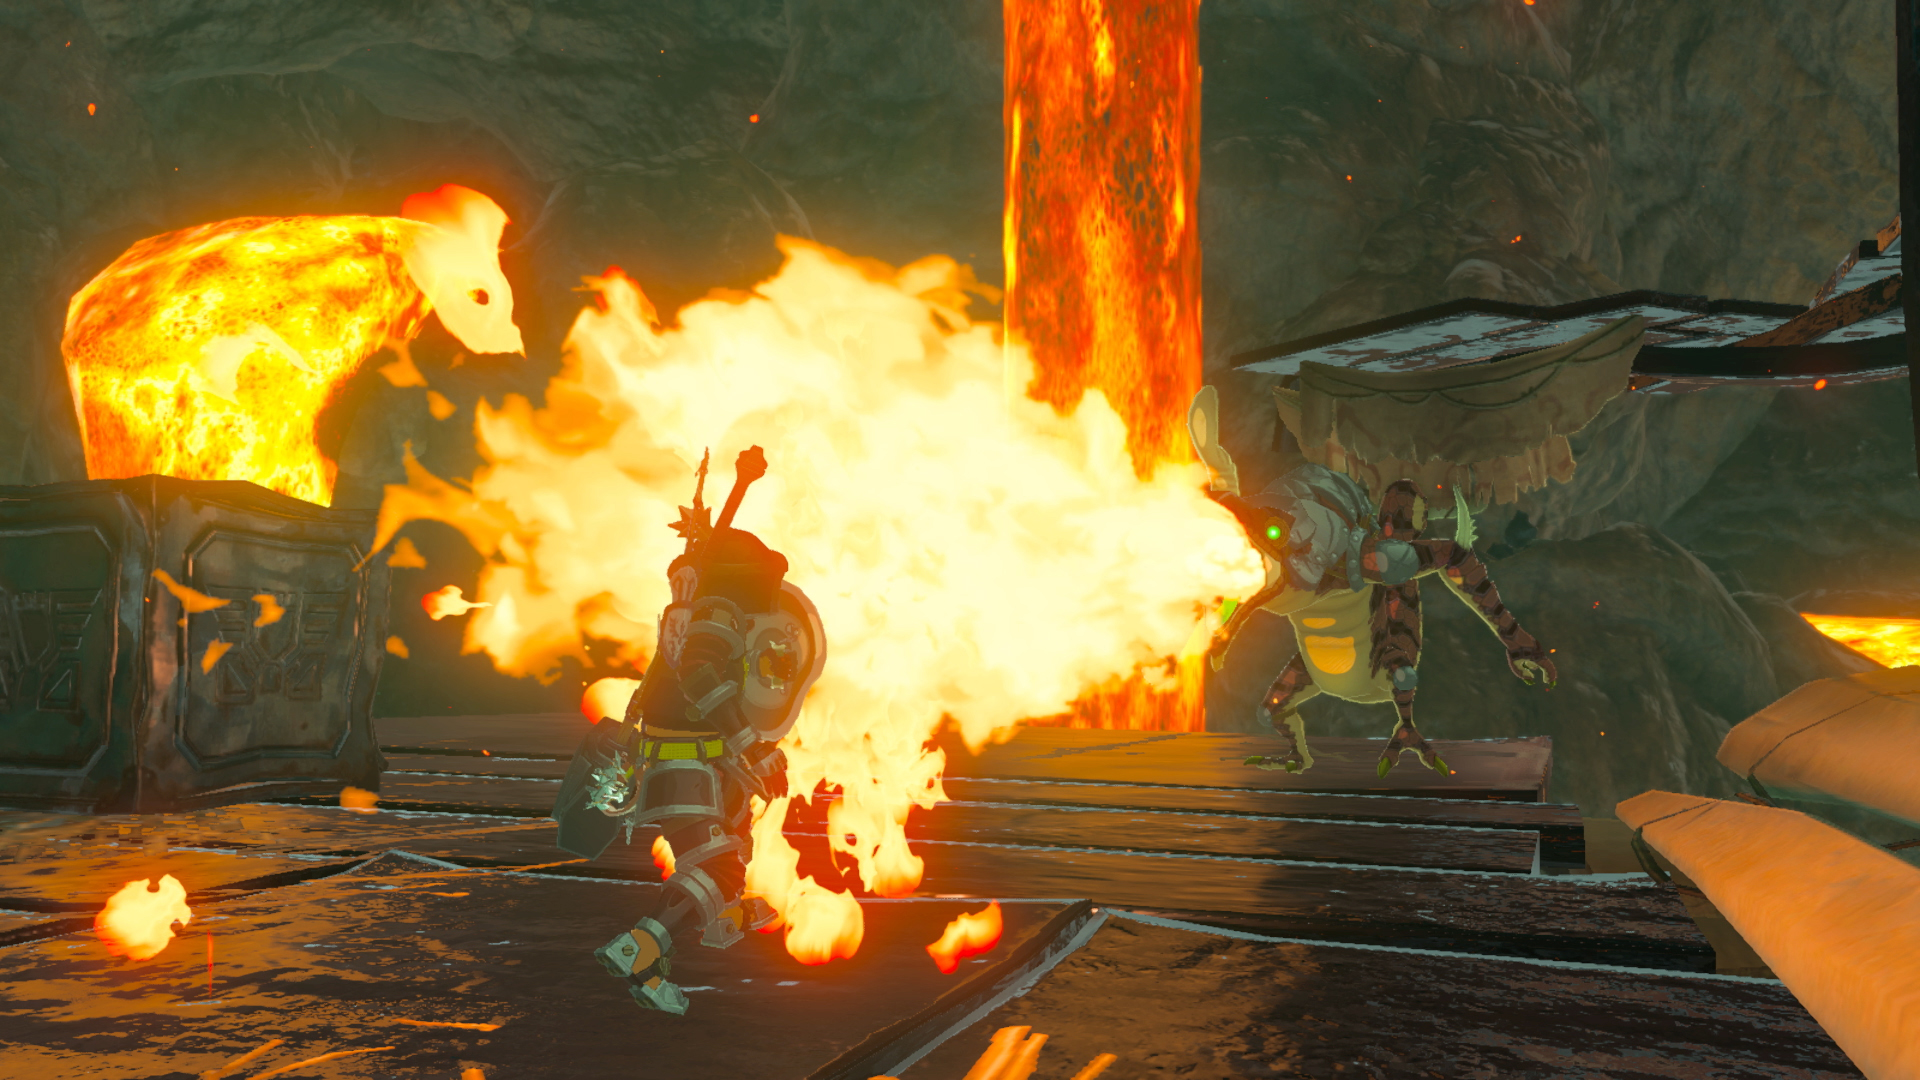 The 7 Most Useful Recipes in The Legend of Zelda: Breath of the Wild